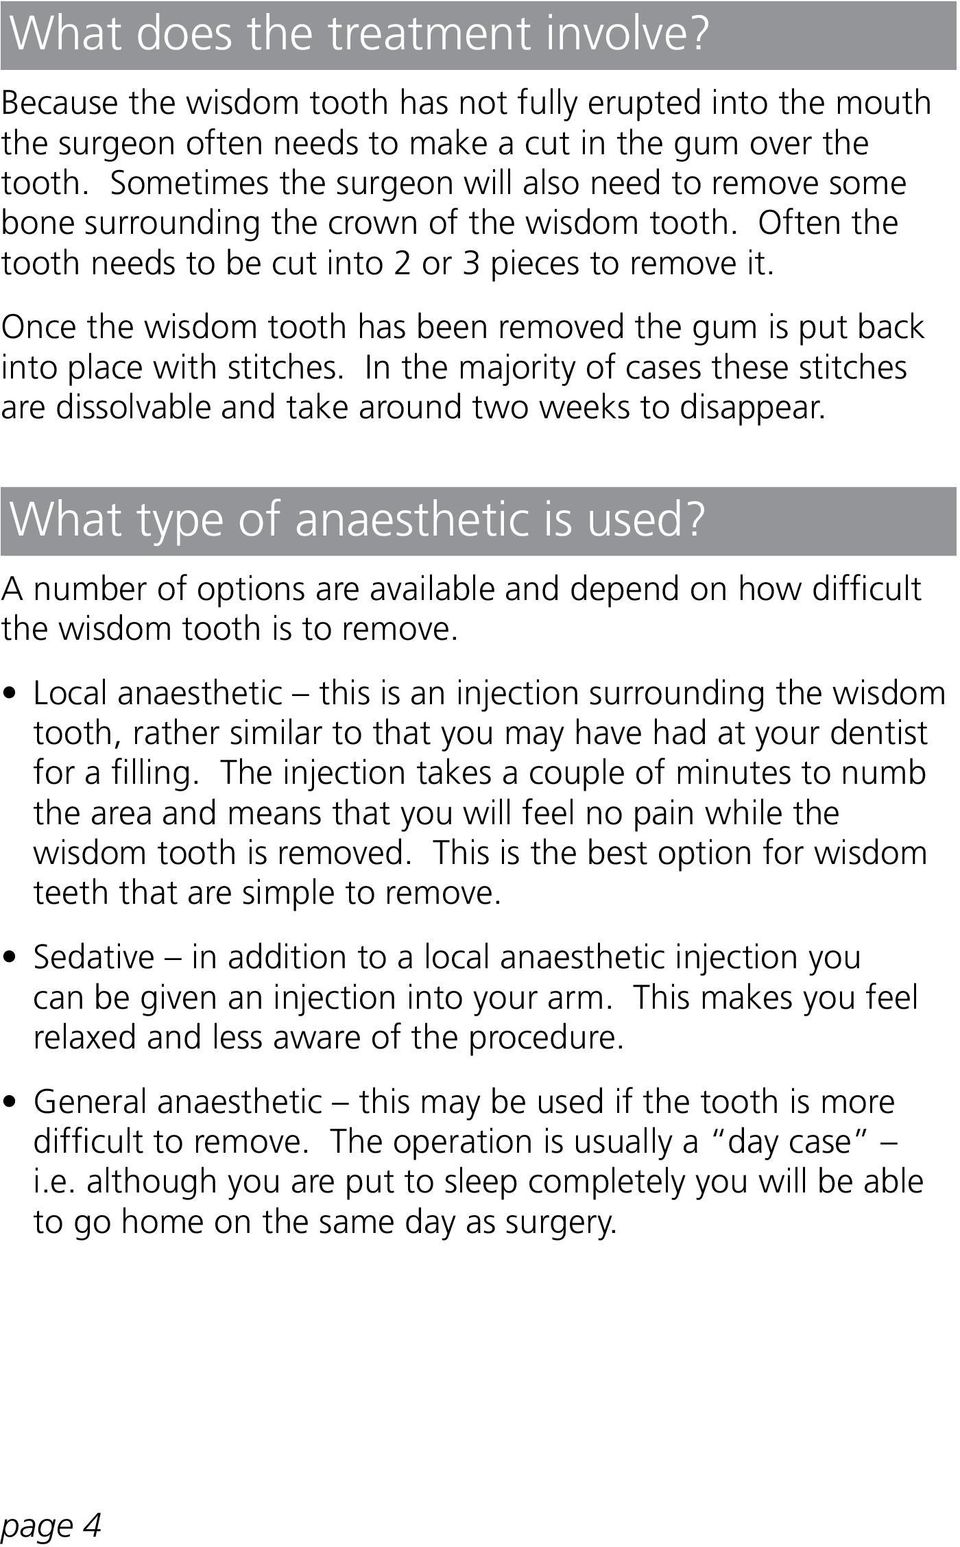 Once the wisdom tooth has been removed the gum is put back into place with stitches. In the majority of cases these stitches are dissolvable and take around two weeks to disappear.